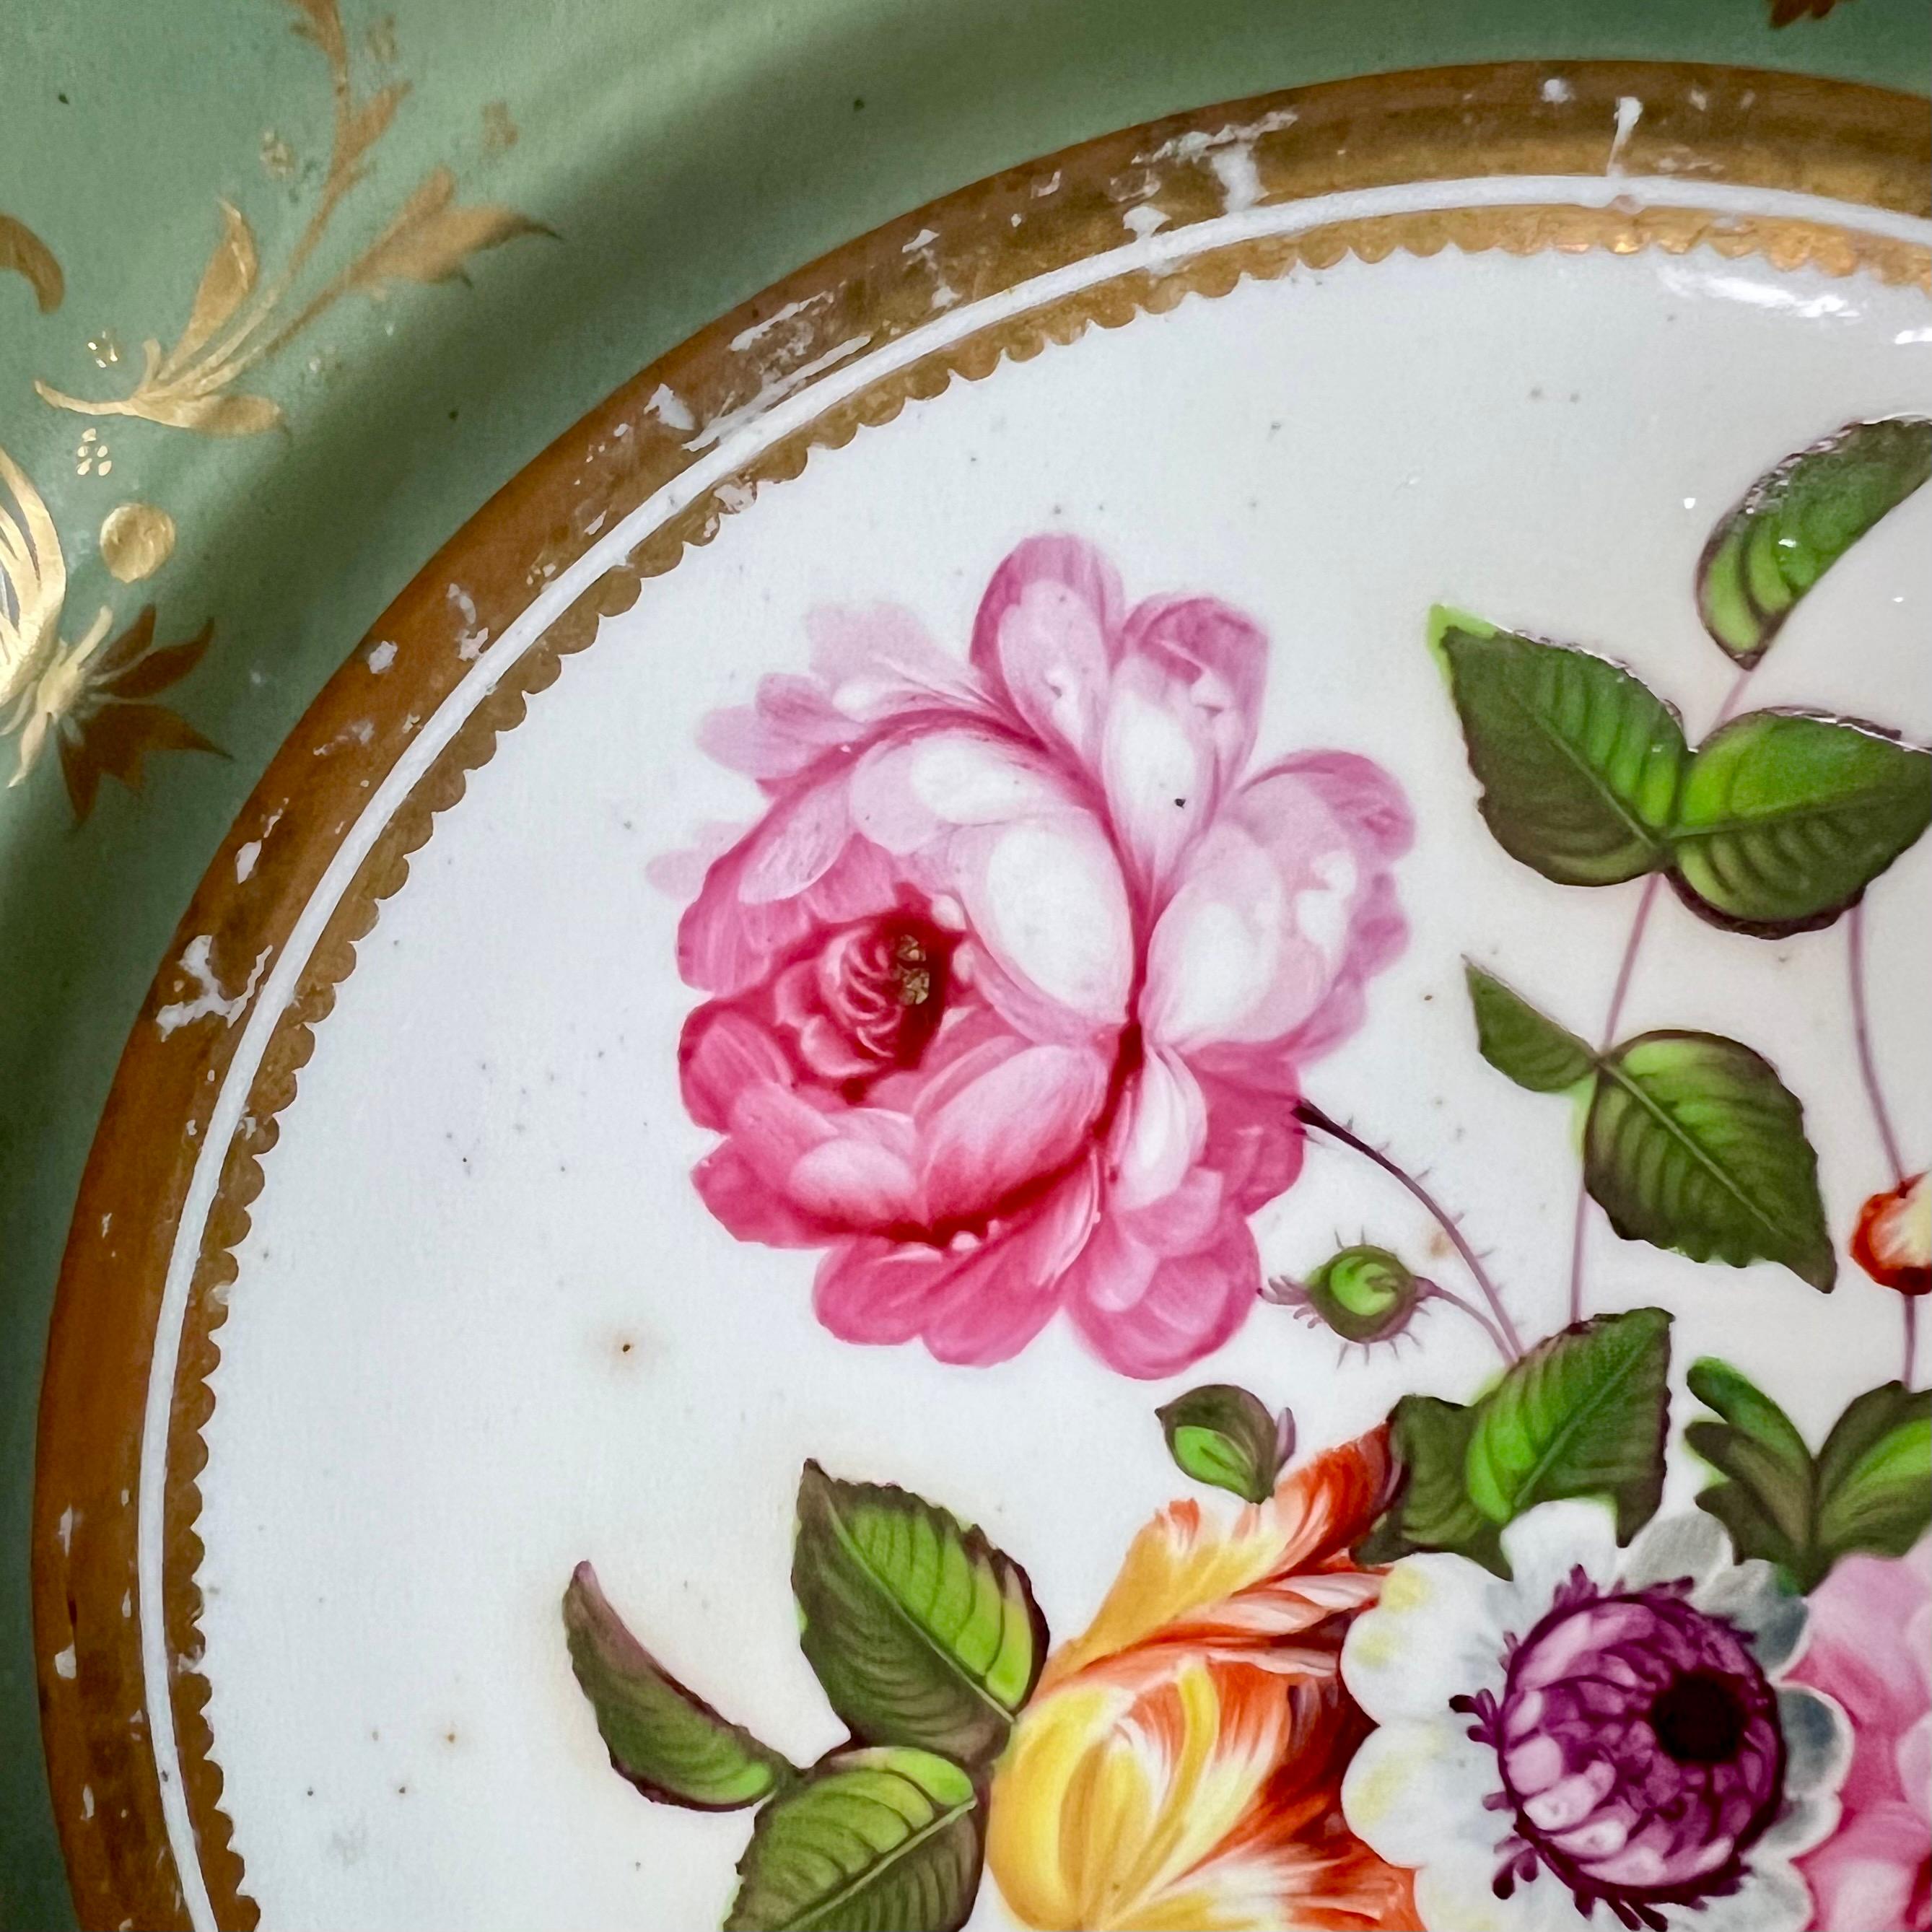 English Samuel Alcock Plate, Melted Snow Border, Sepia Green with Flowers, ca 1822